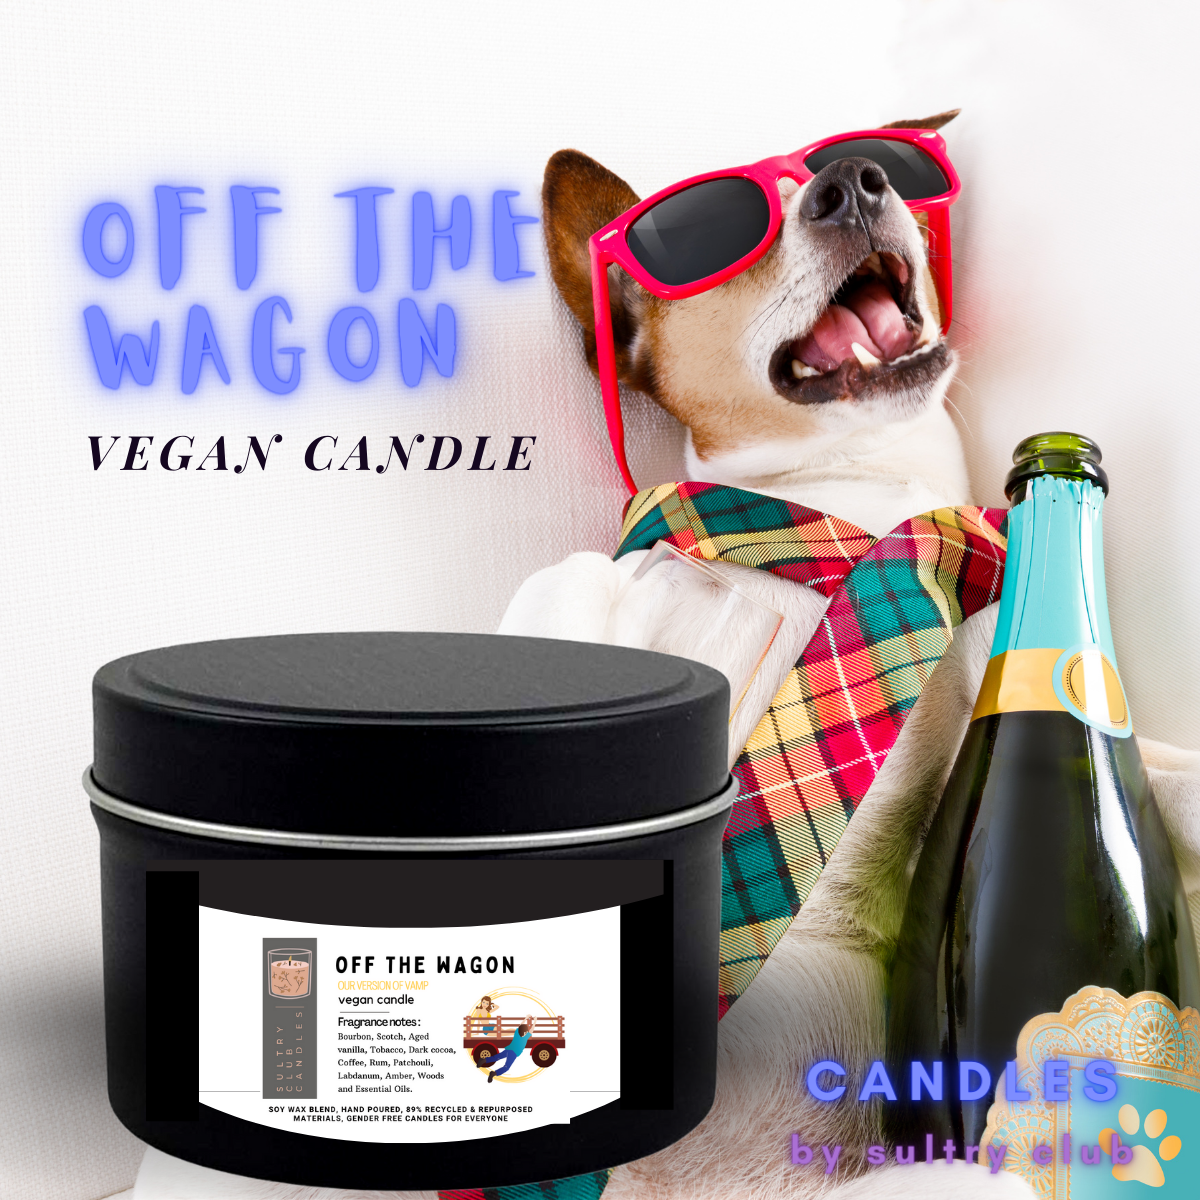 OFF THE WAGON VEGAN CANDLE